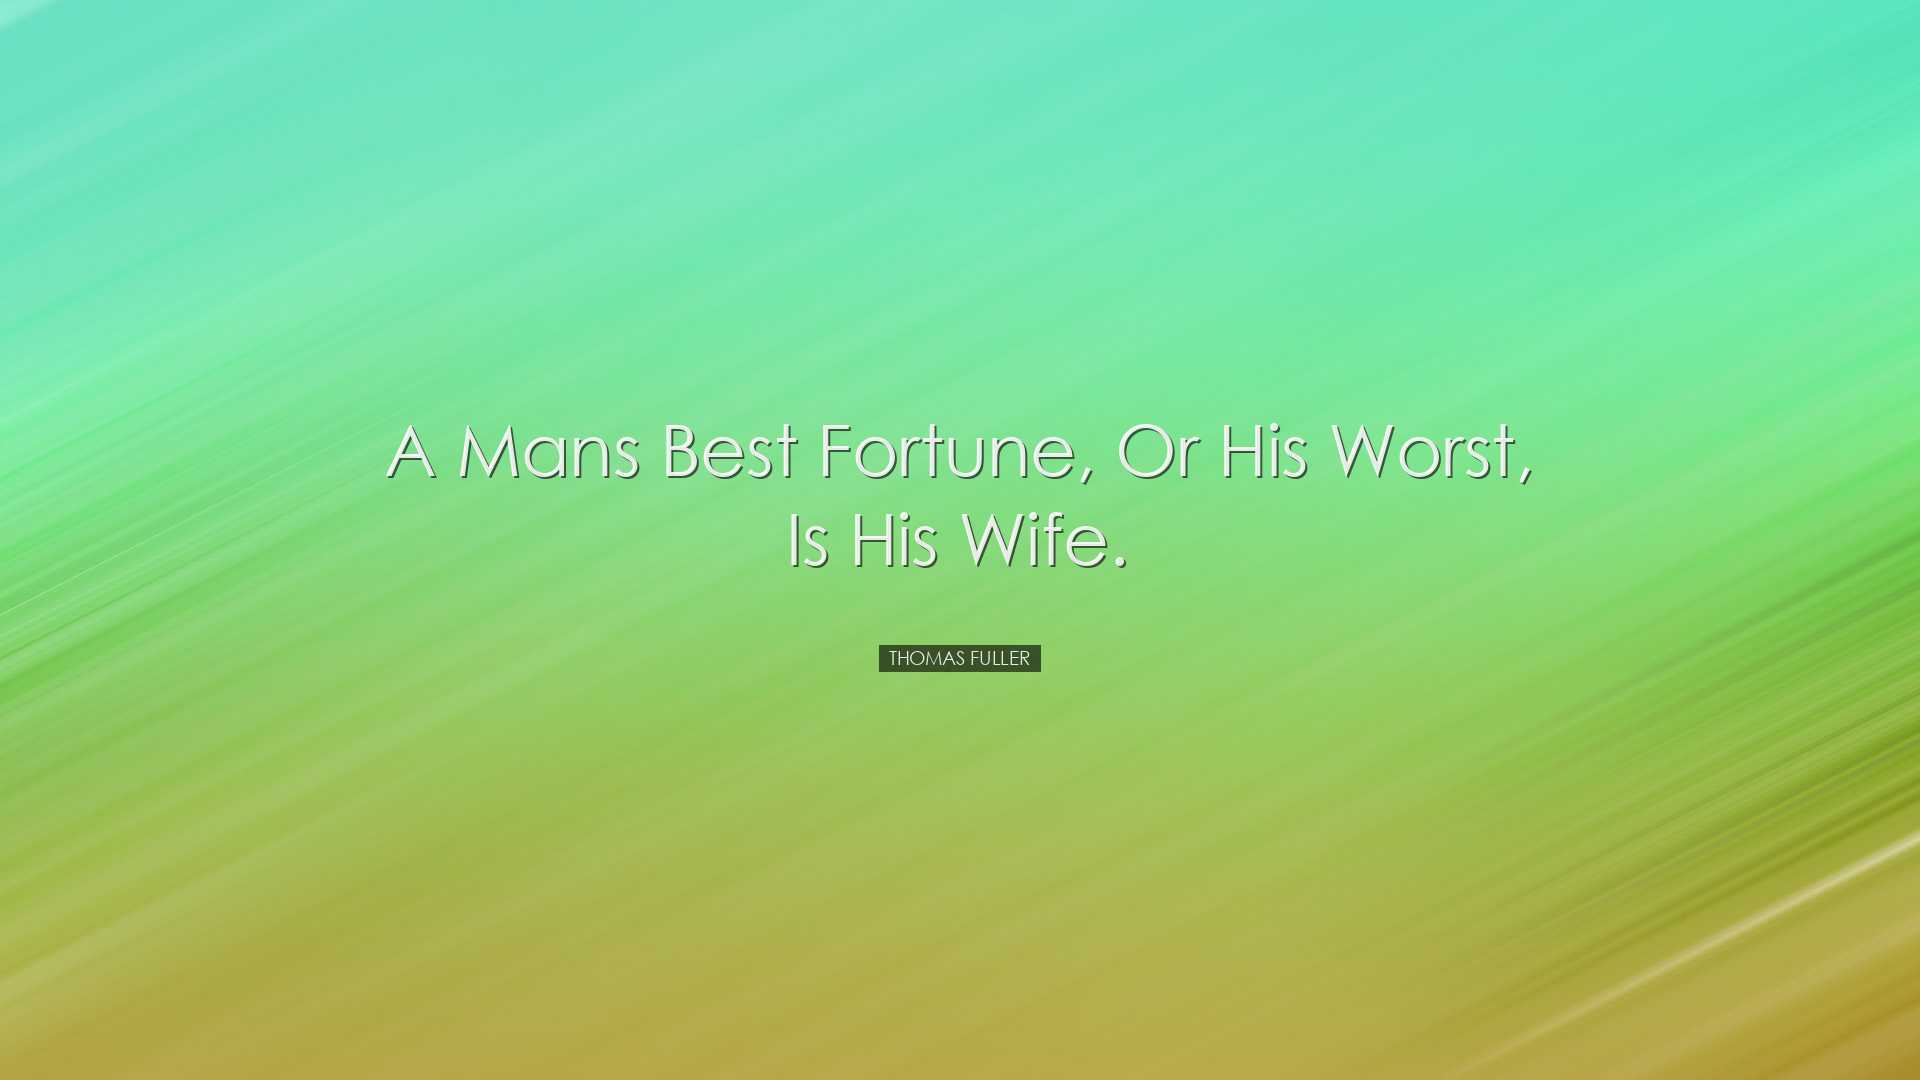 A mans best fortune, or his worst, is his wife. - Thomas Fuller